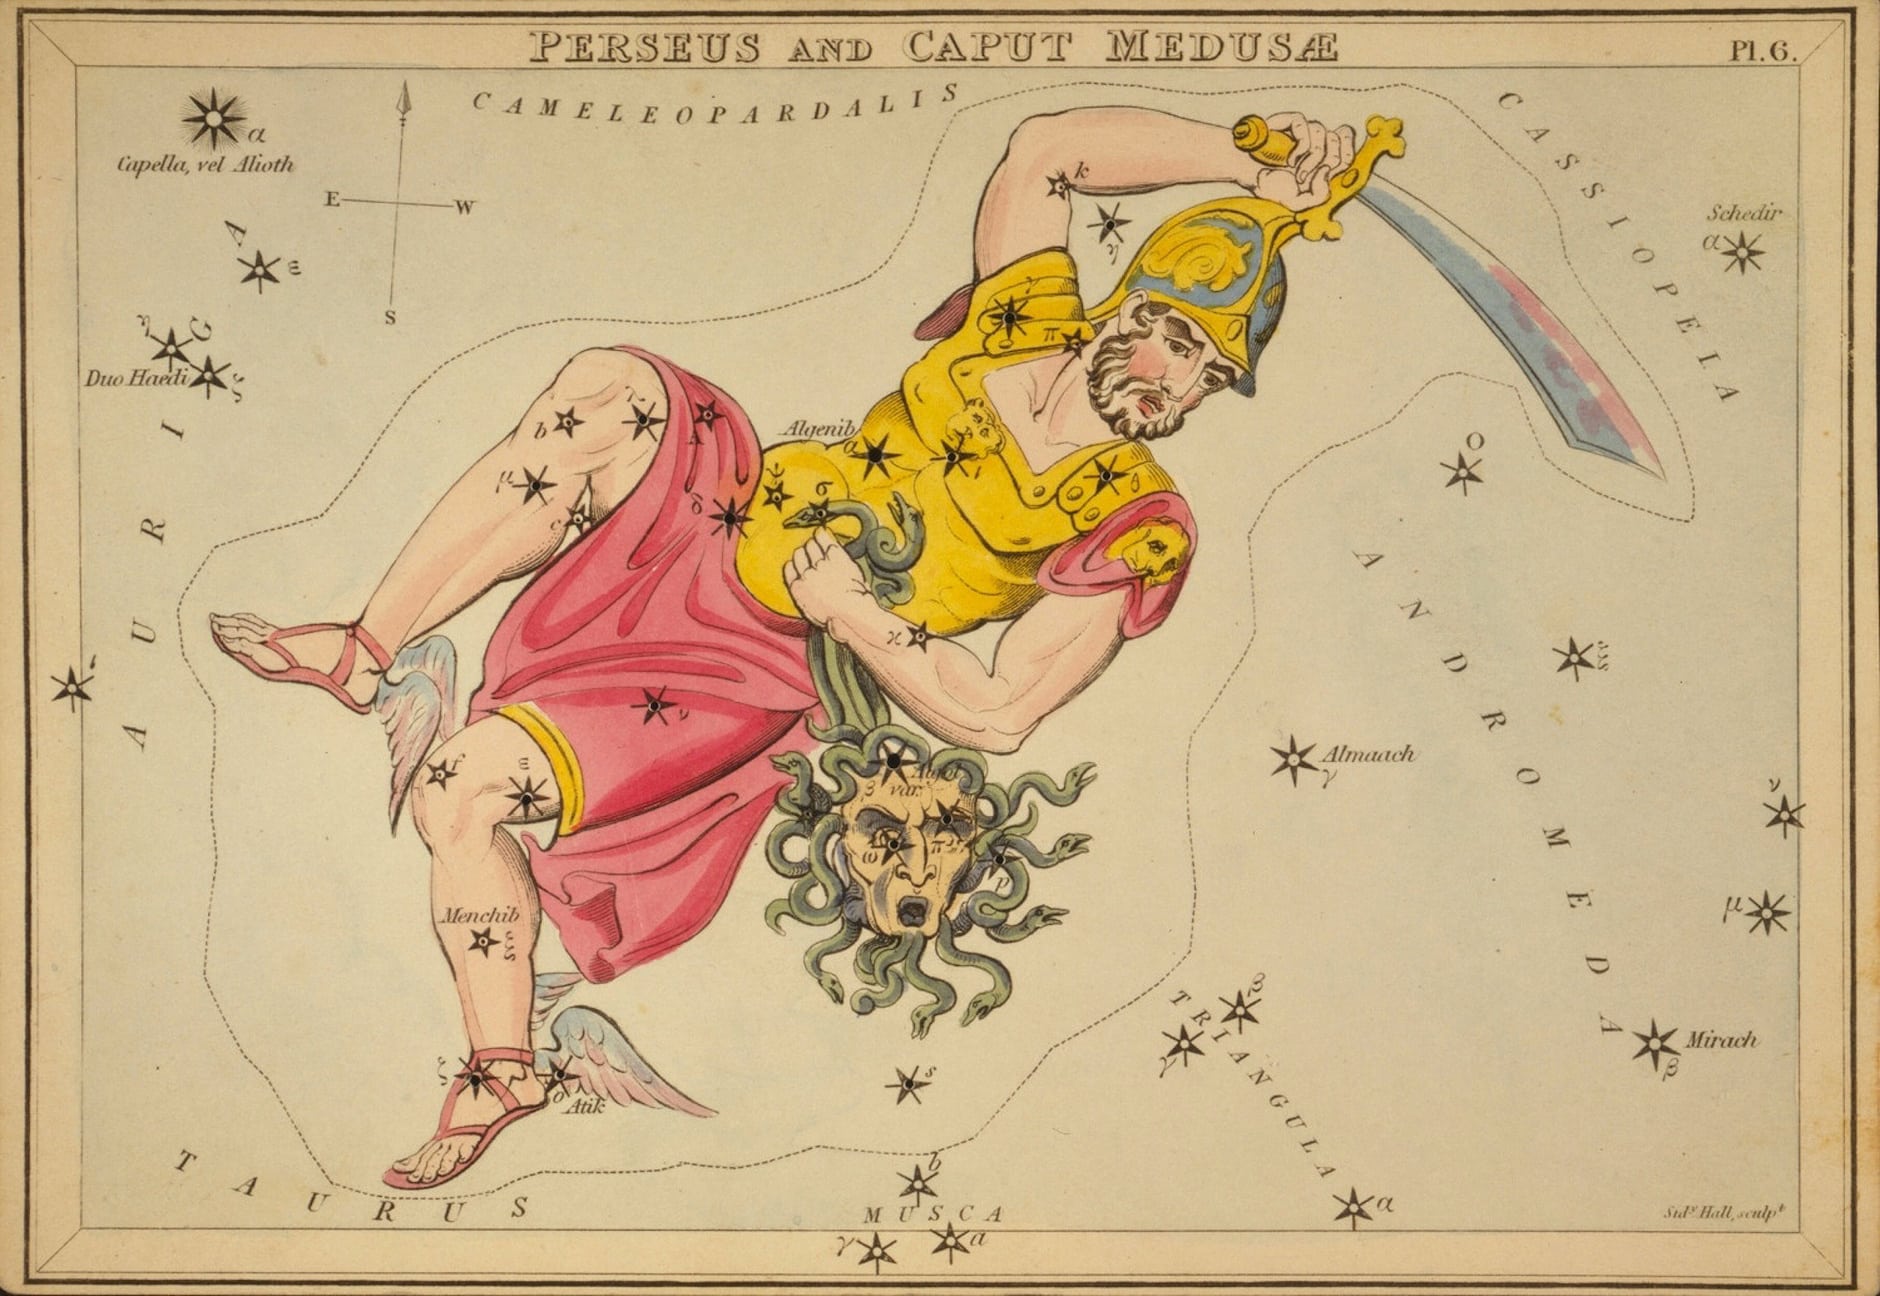 The constellation Perseus inspired the Perseid meteor shower's name.